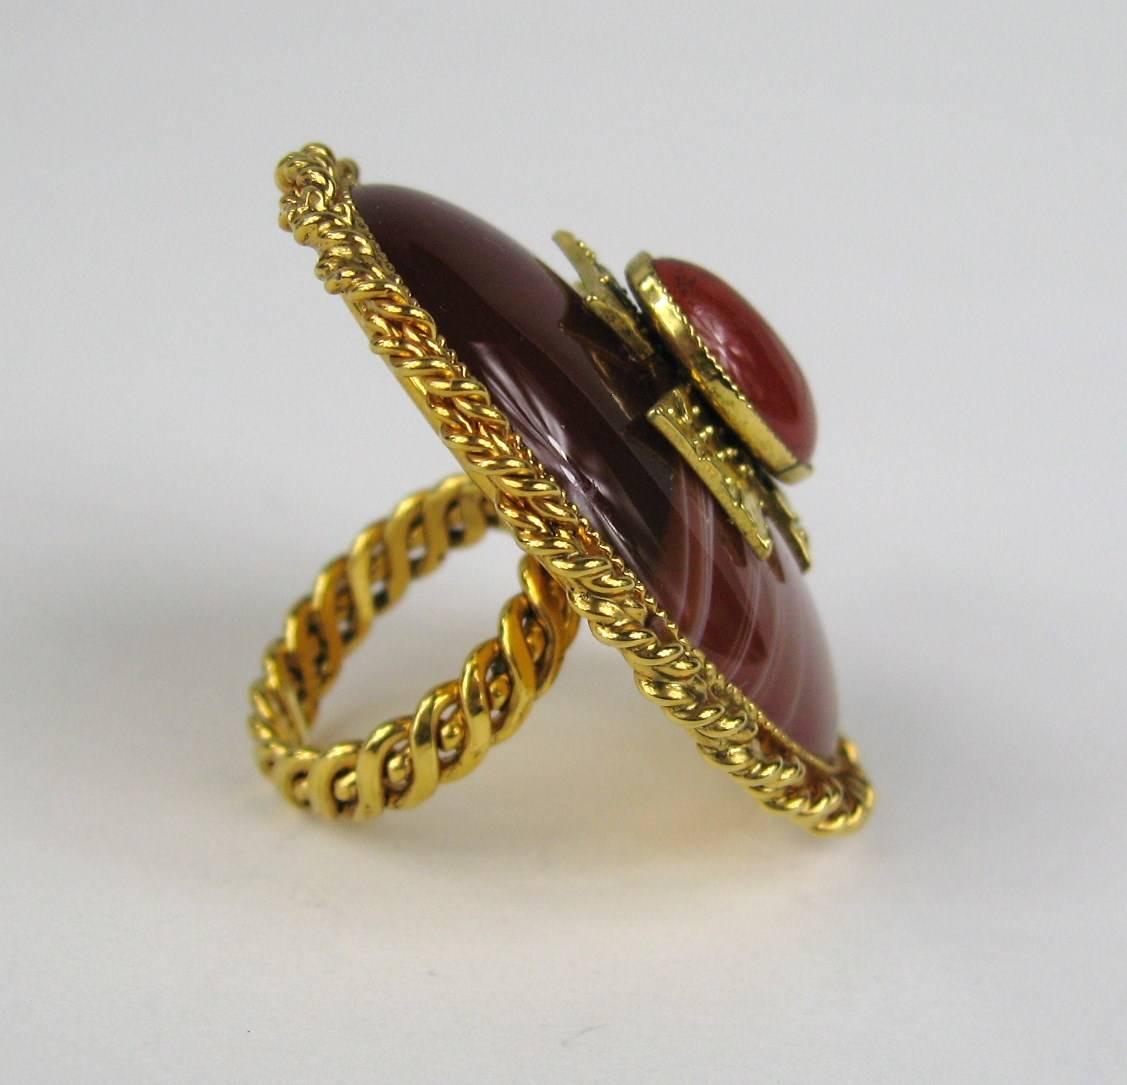 Large Philippe Ferrandis Ring. Oval Gold Gilt Braided motif surrounding a gripoix poured glass center. A Top is a Maltese Cross set in gripoix. This is is a large ring. Measuring 1.83 inches x 1.47 inches wide. The ring is a size 6.5. This is out of